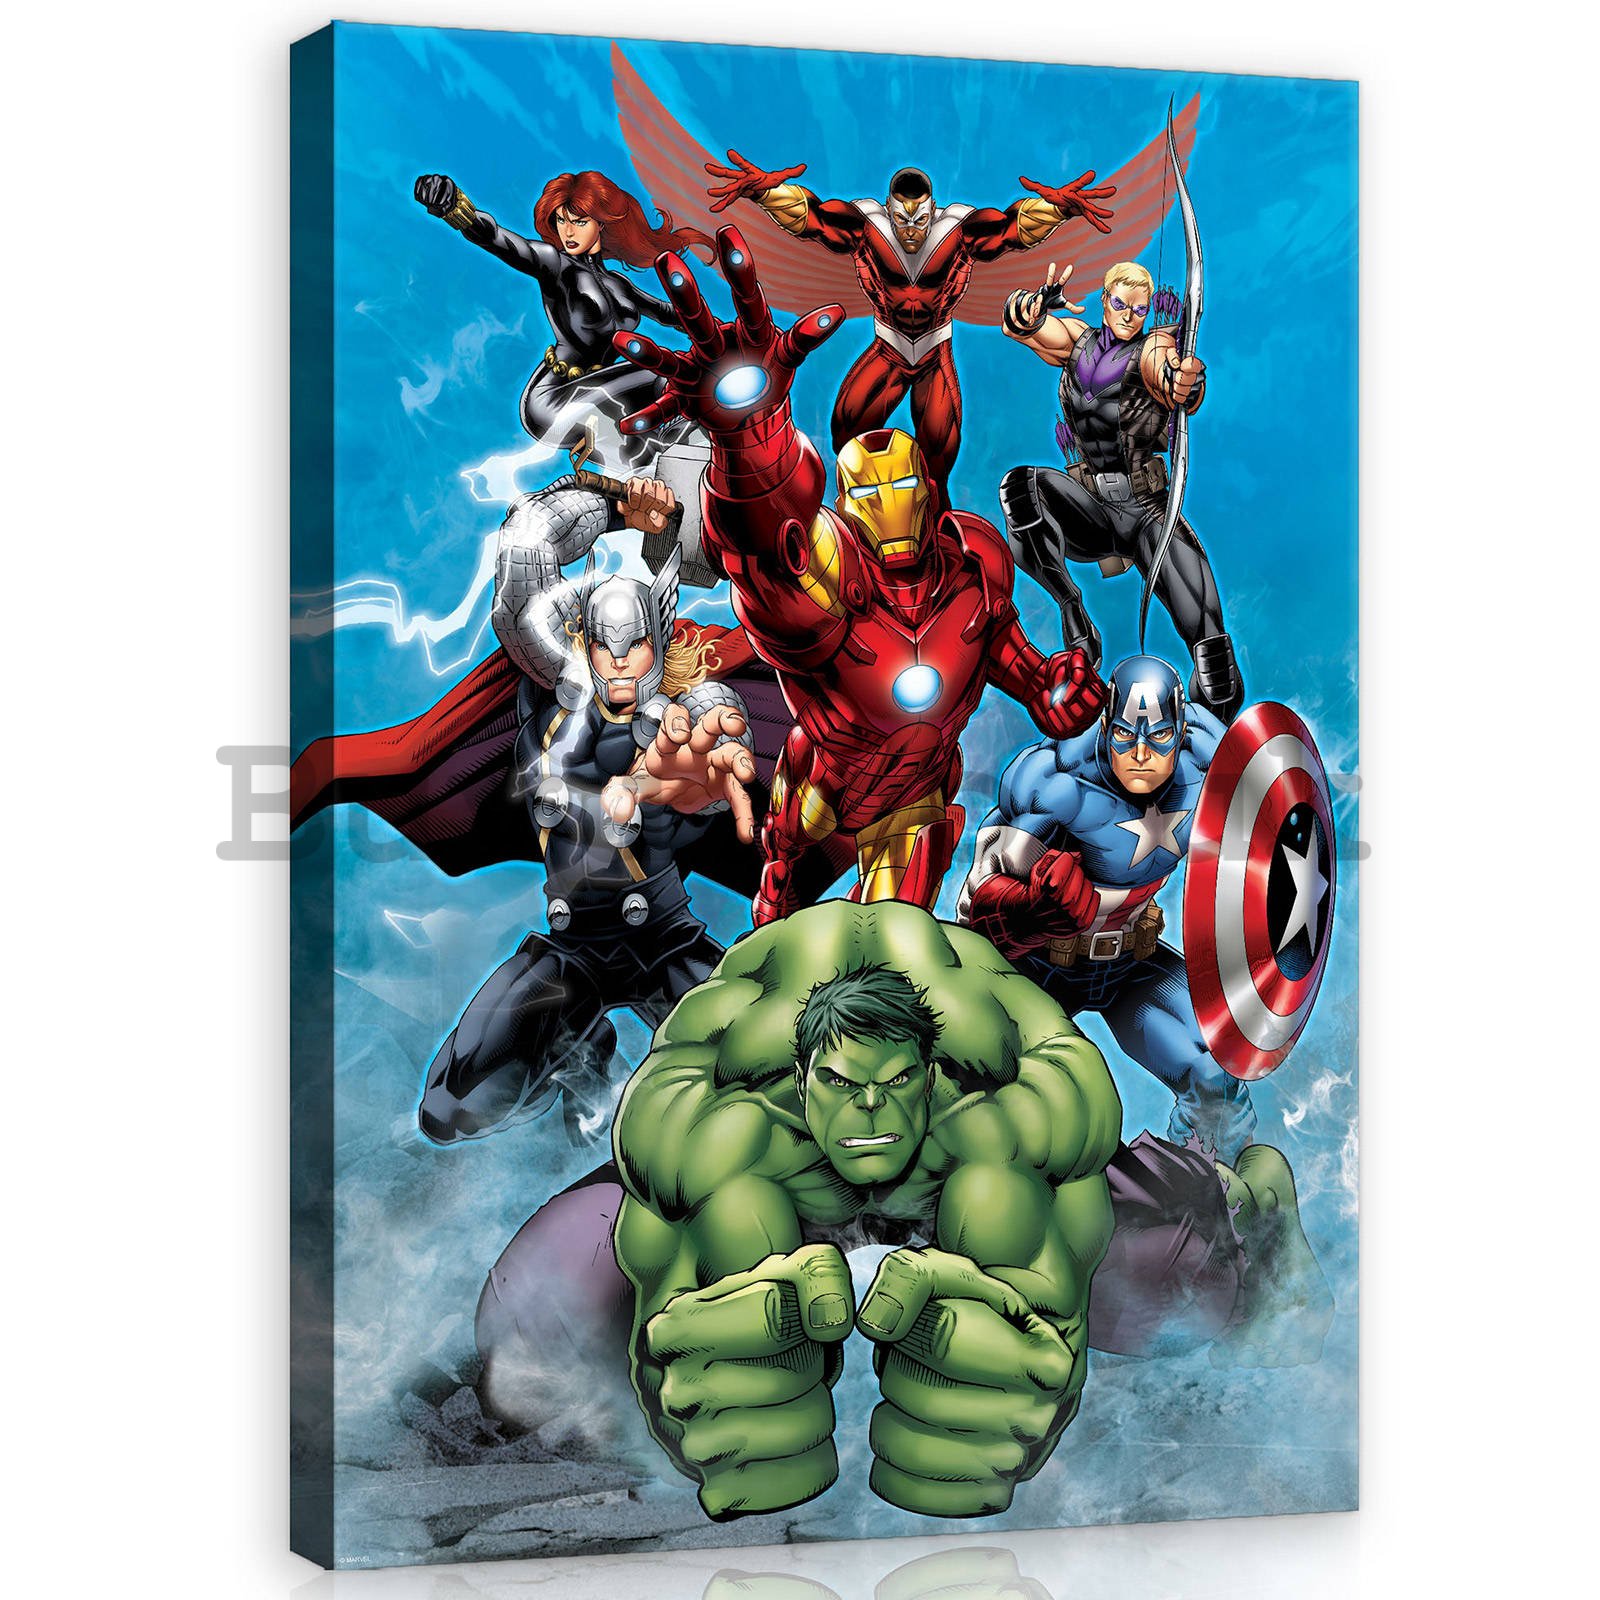 Painting on canvas: Avengers (1) - 75x100 cm